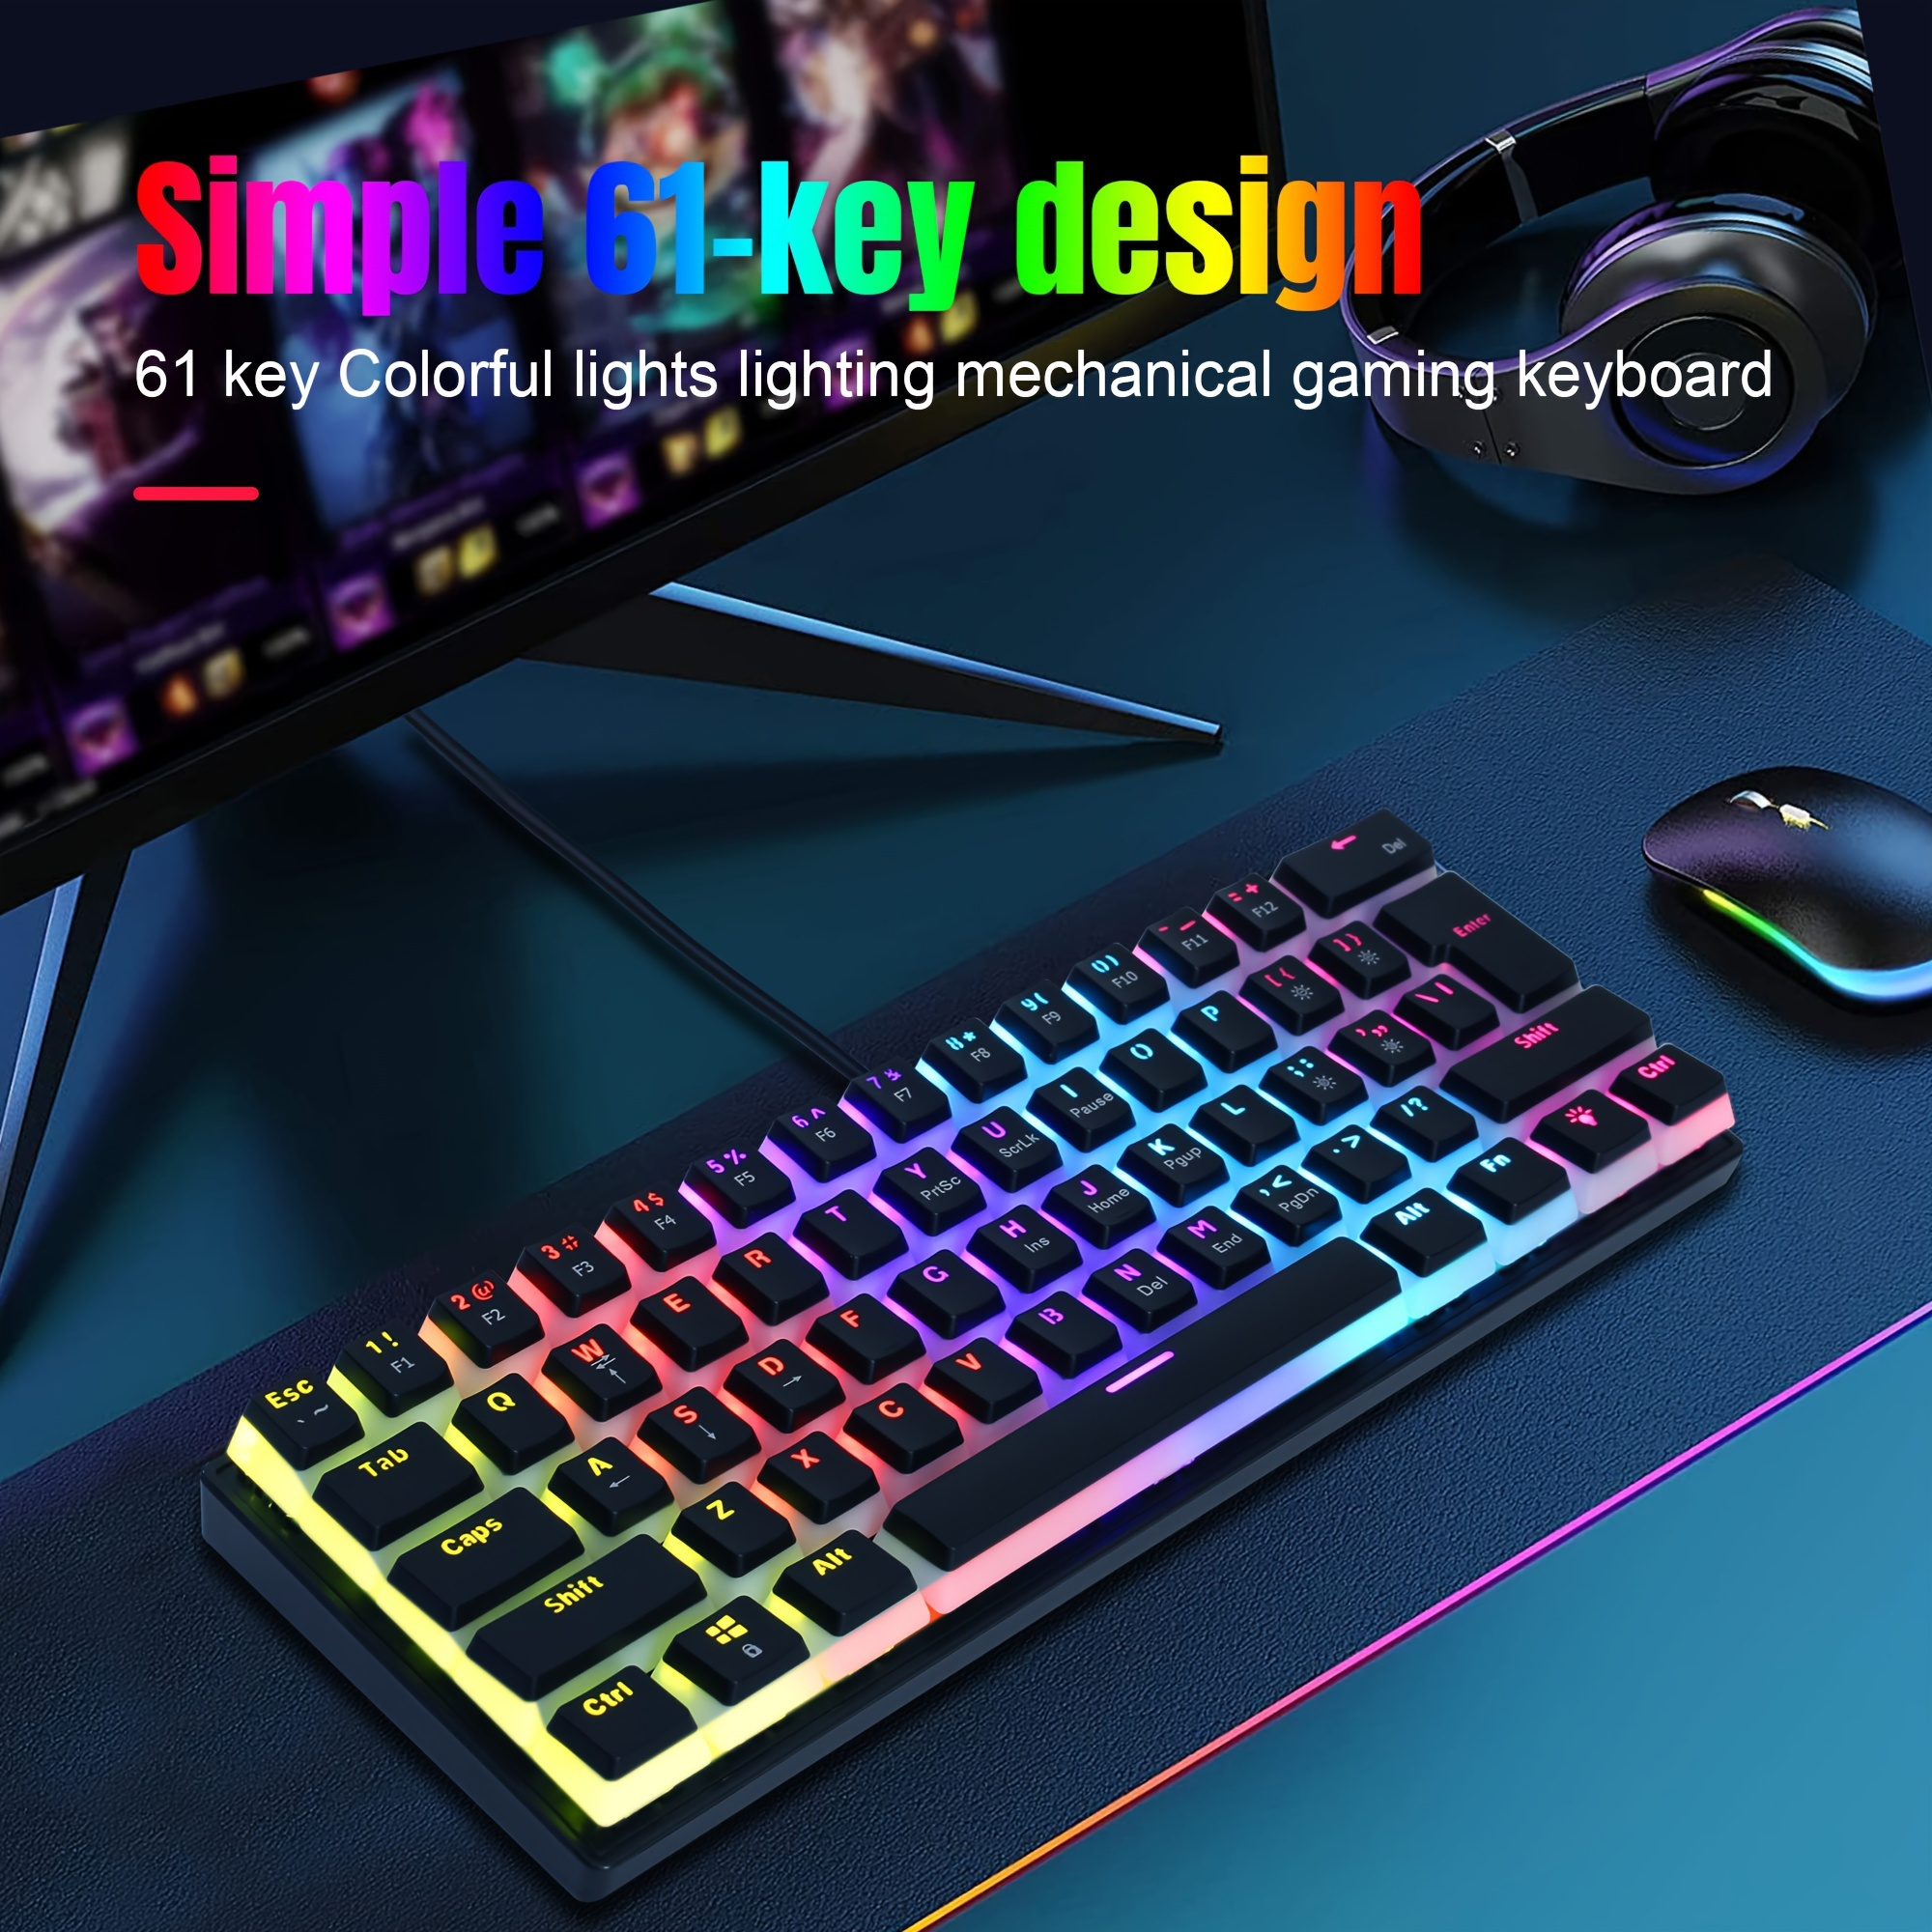 

Compact 60% New Green Switch Mechanical Wired Keyboard With 61 Keys Pudding Two-color Moulded Key Cover Backlit Usb Plug And Play Ideal For Home Games And The Office